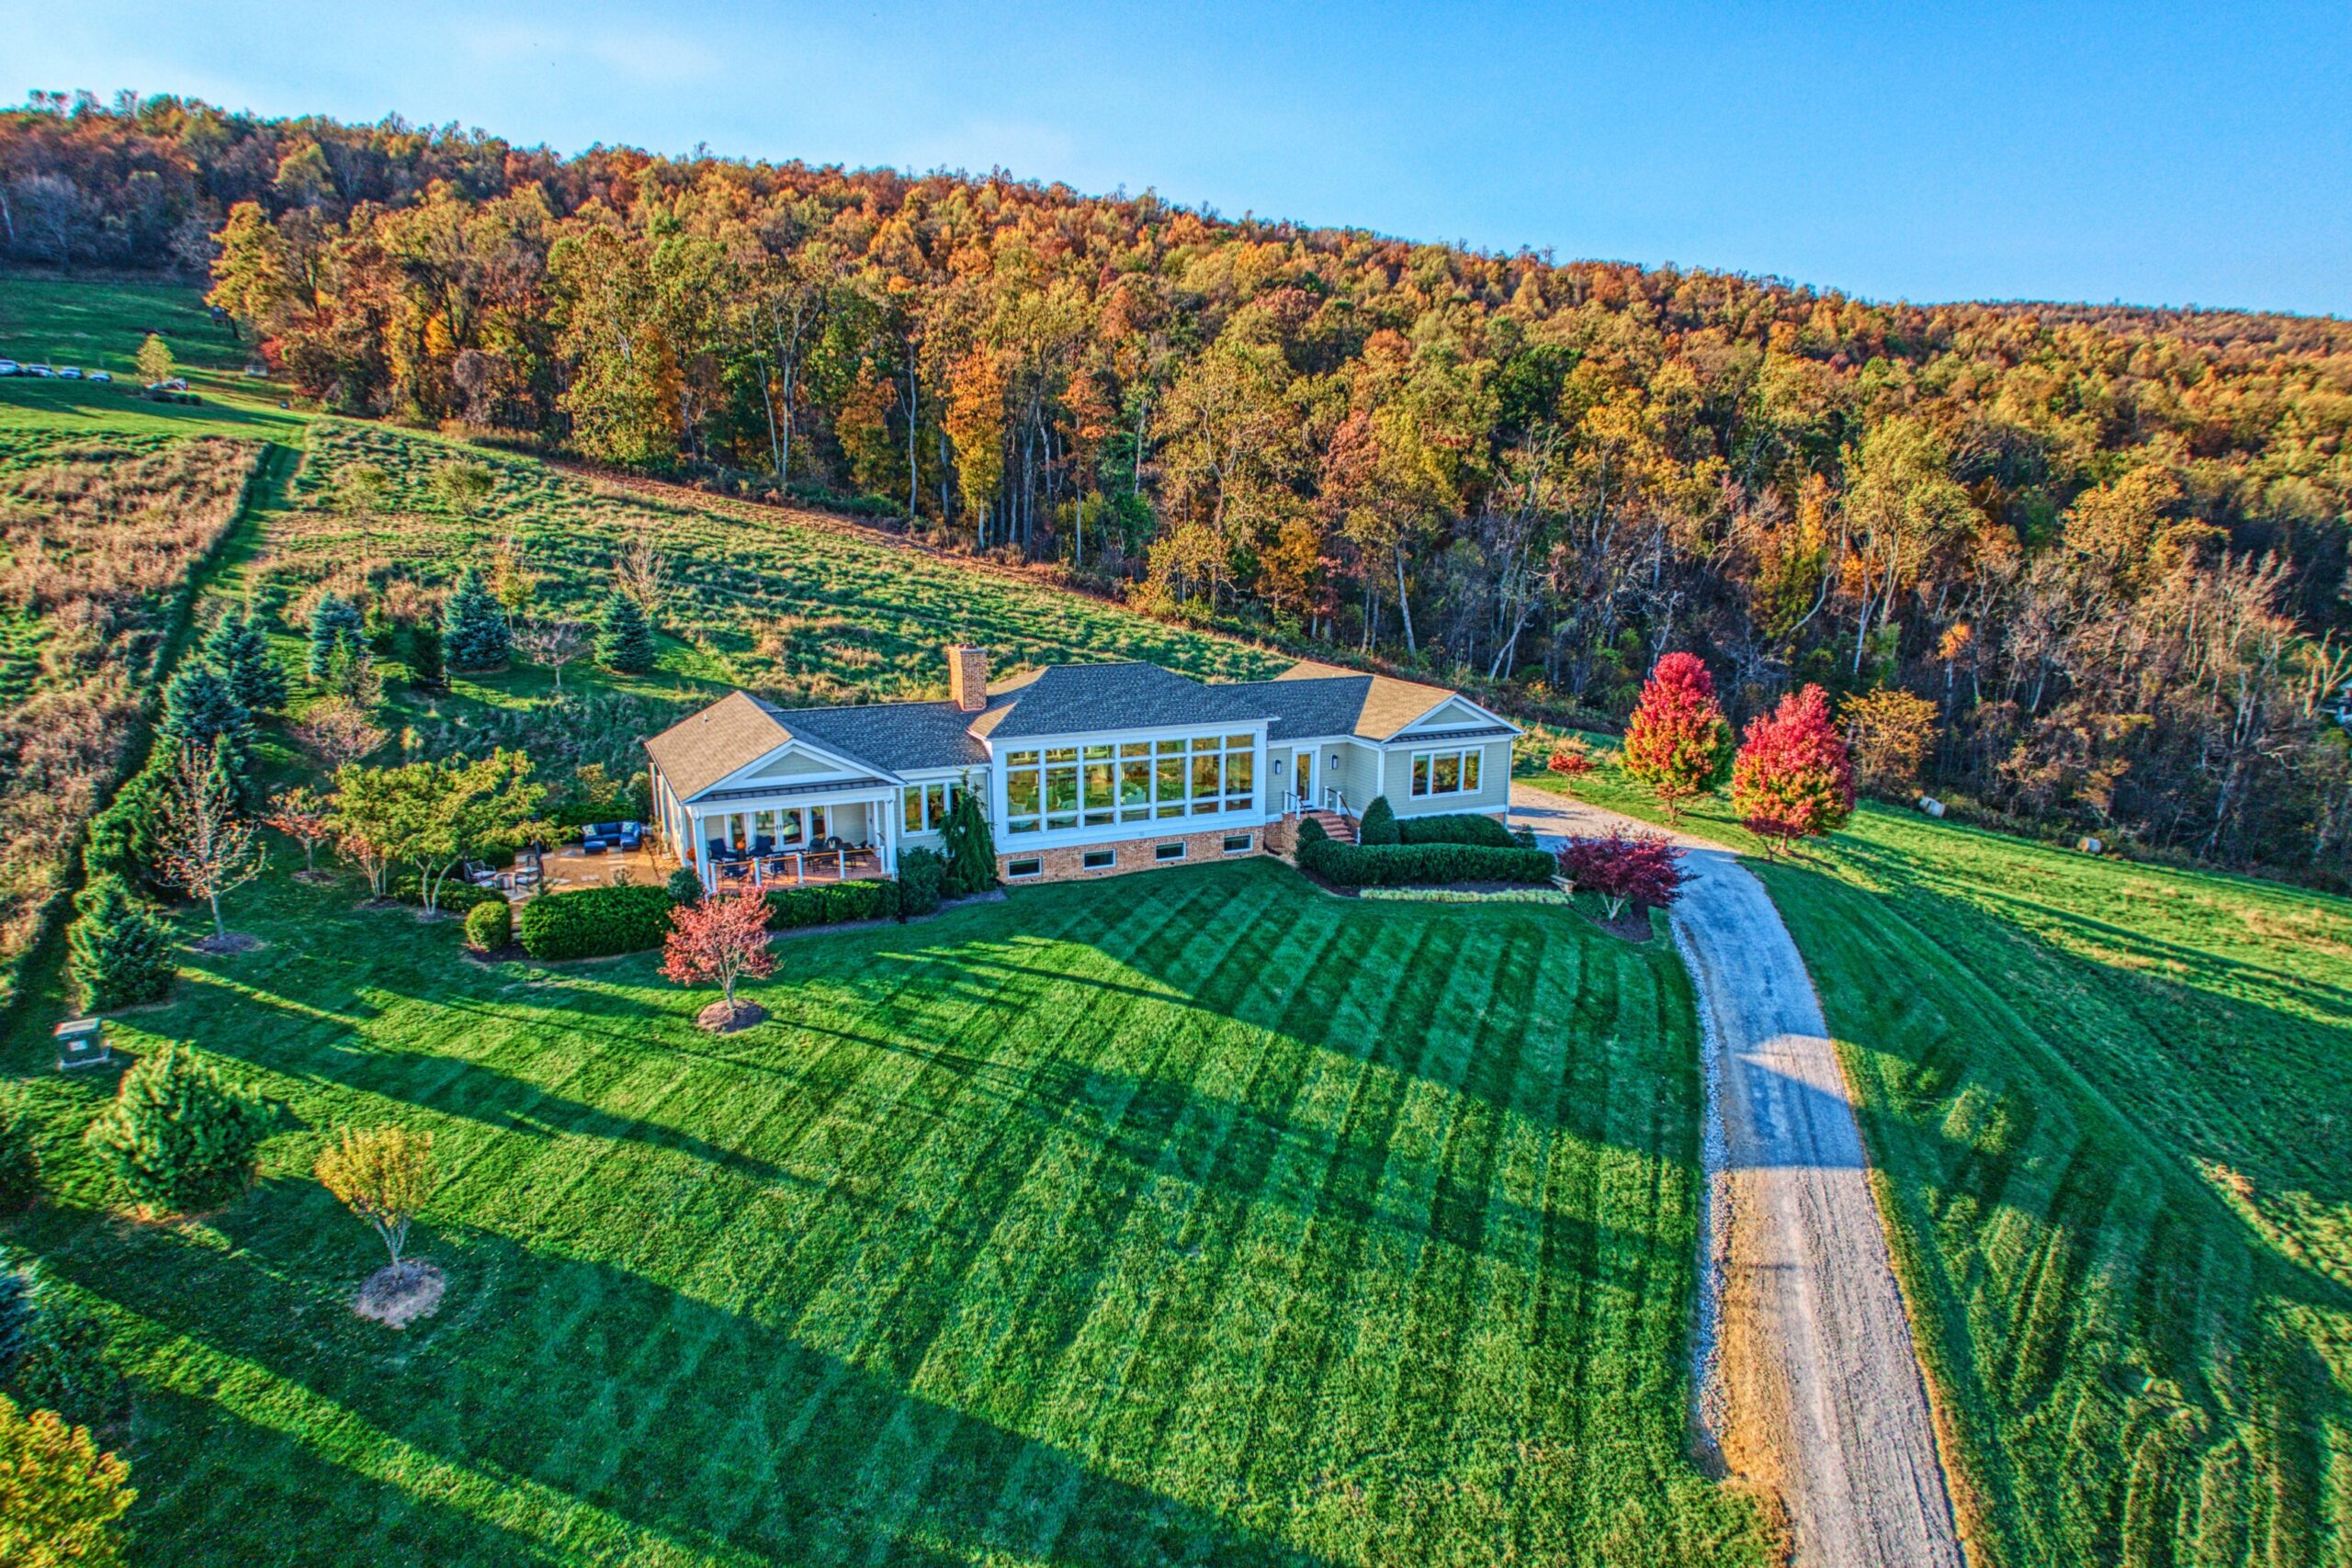 Professional exterior photo of 17151 Brookdale Ln in Round Hill, VA - showing the aerial view of the front of the home with large windows all across the front of the contemporary home